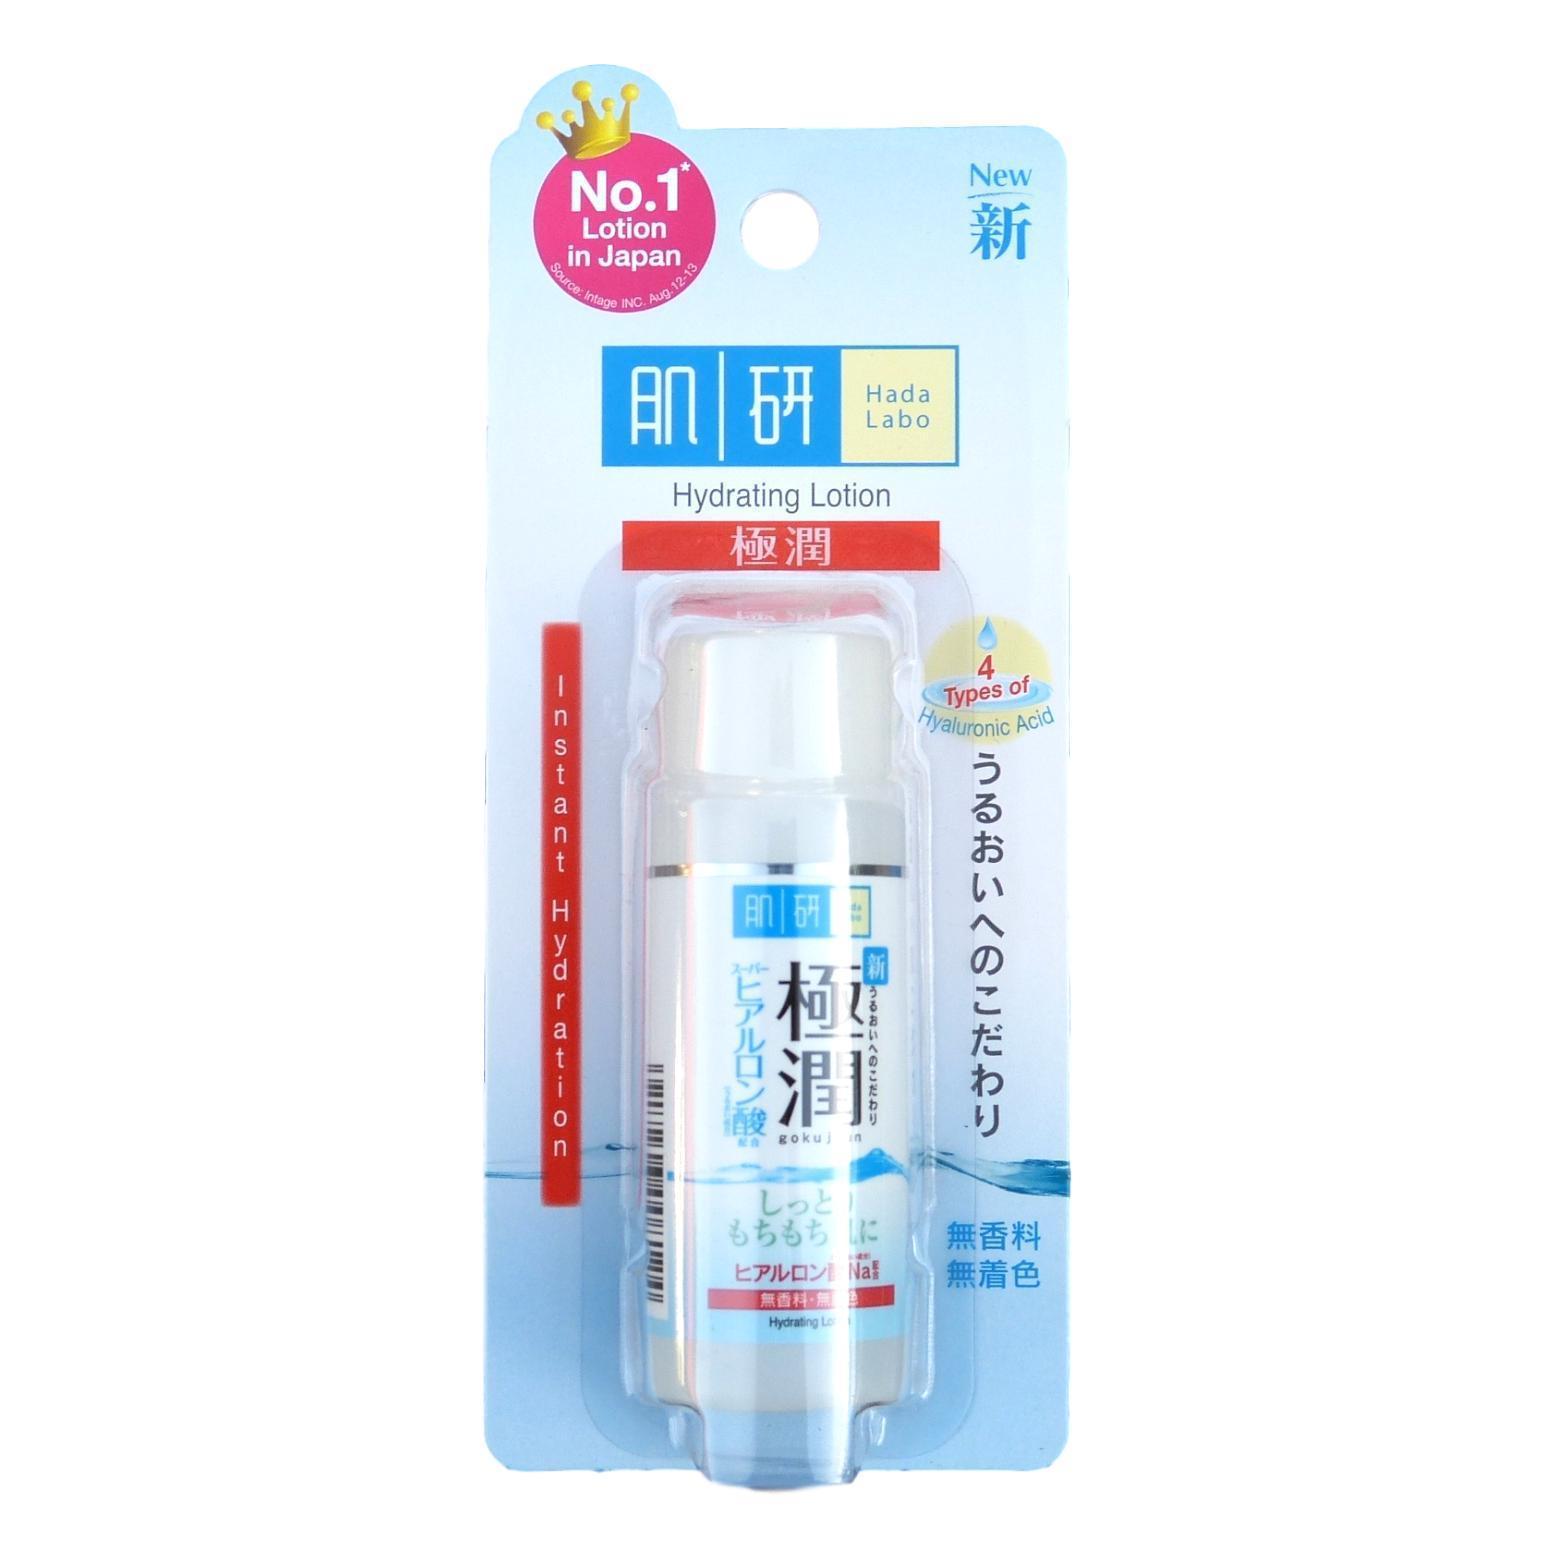 Hada Labo Super Hydrating Lotion Toner with Hyaluronic Acid 30ml - Asian Beauty Supply